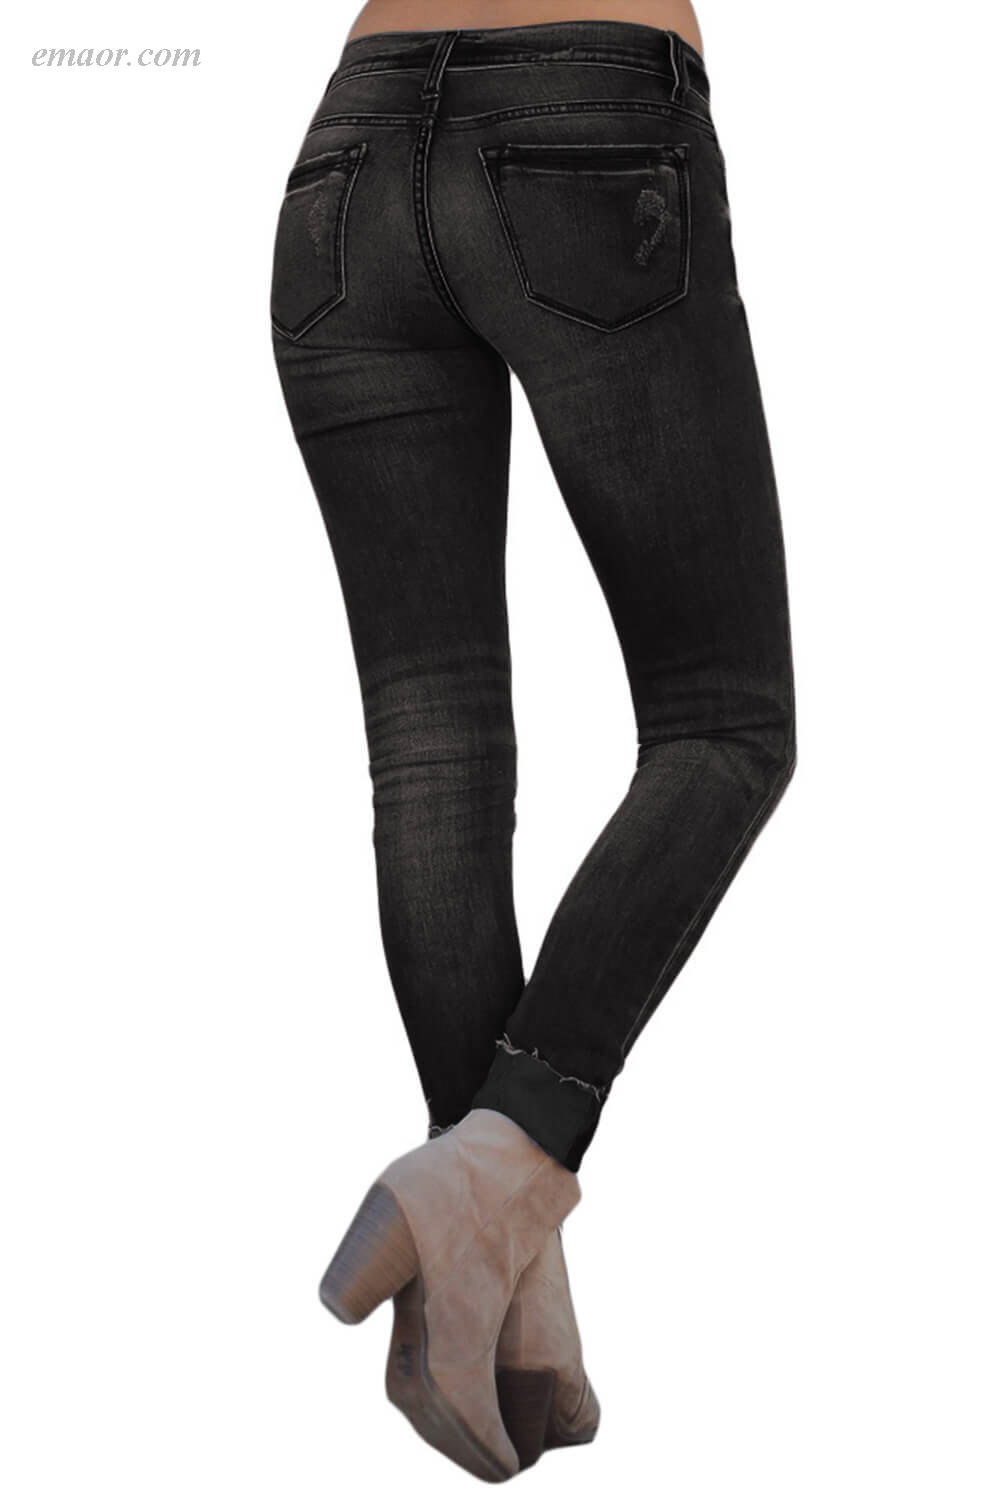 Fashion Skinny Bootcut Women's Ripped Skinny Stretch Jeans Best Jeans on Sale